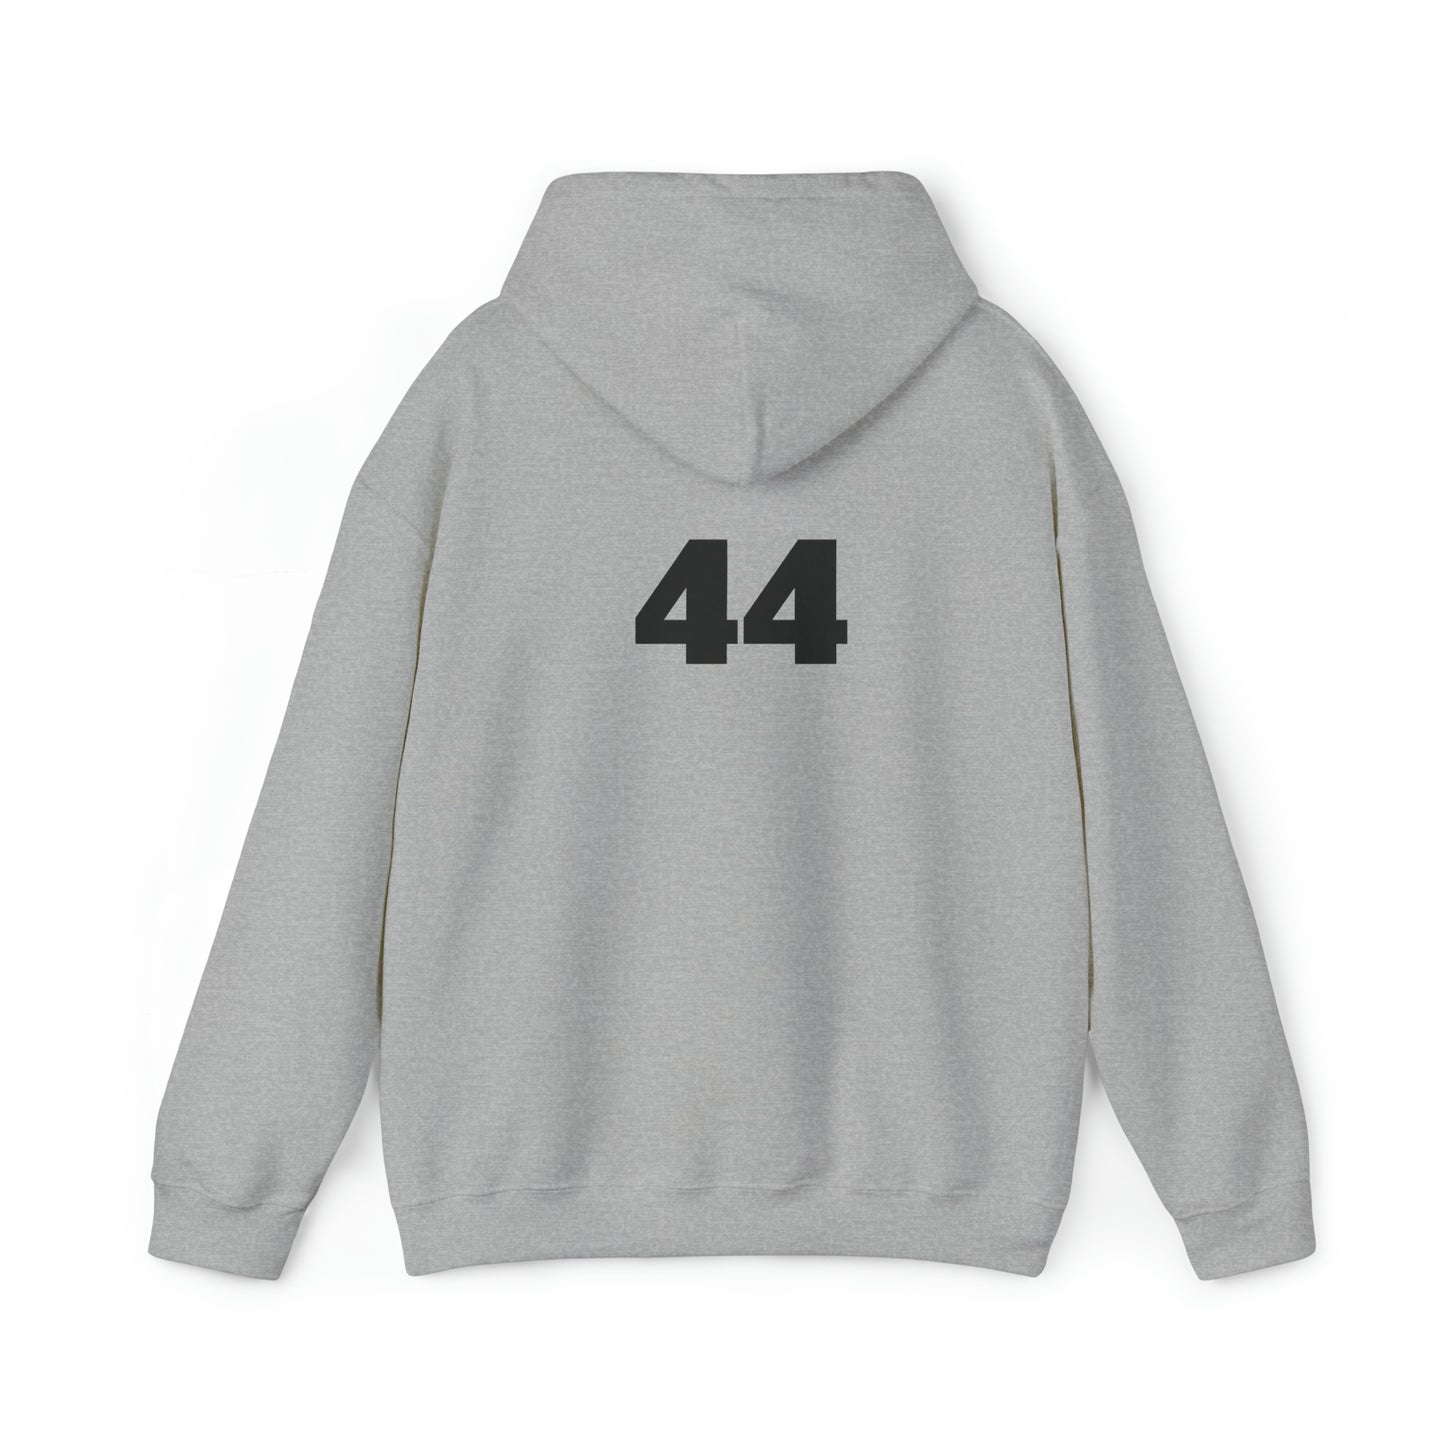 'For All I Thank Him' Hooded Sweatshirt